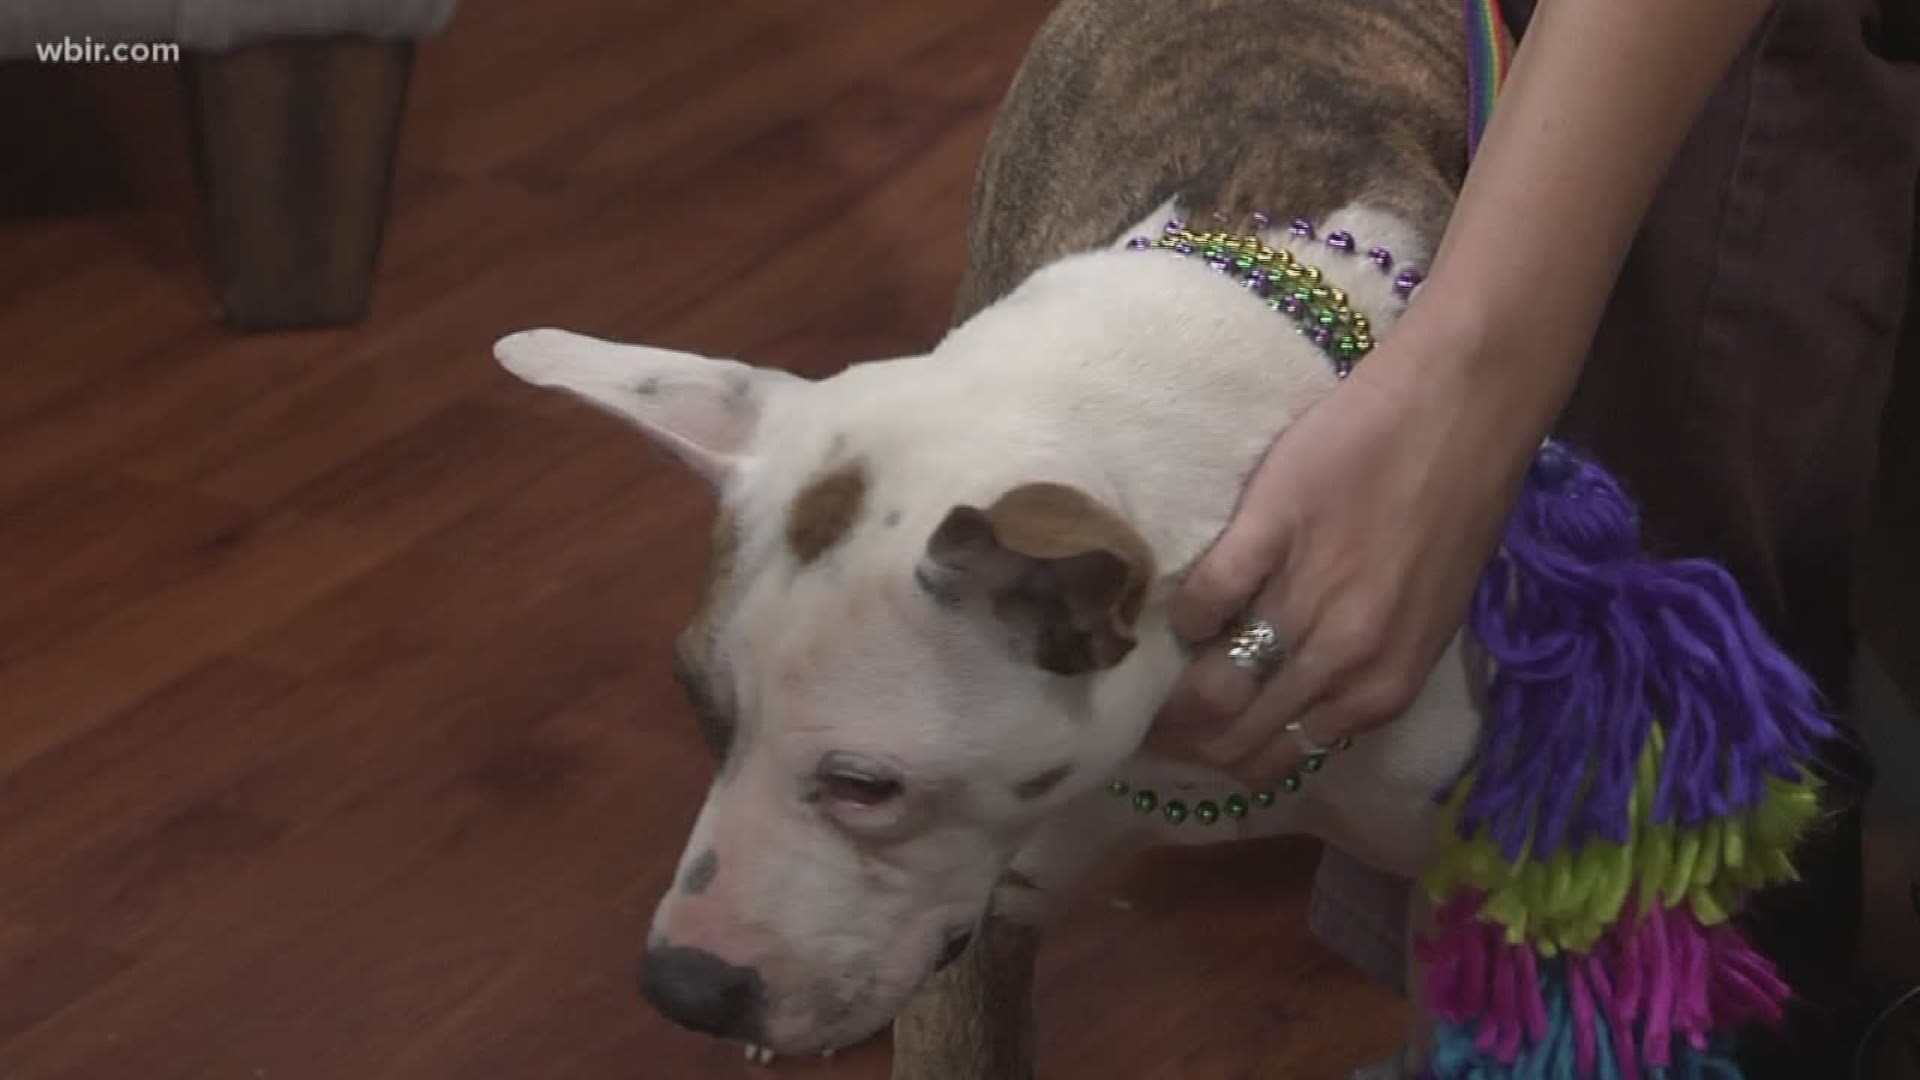 Doctor Lisa Chassy from Young-Williams Animal Center brings in this adorable, adoptable pup named Annie.